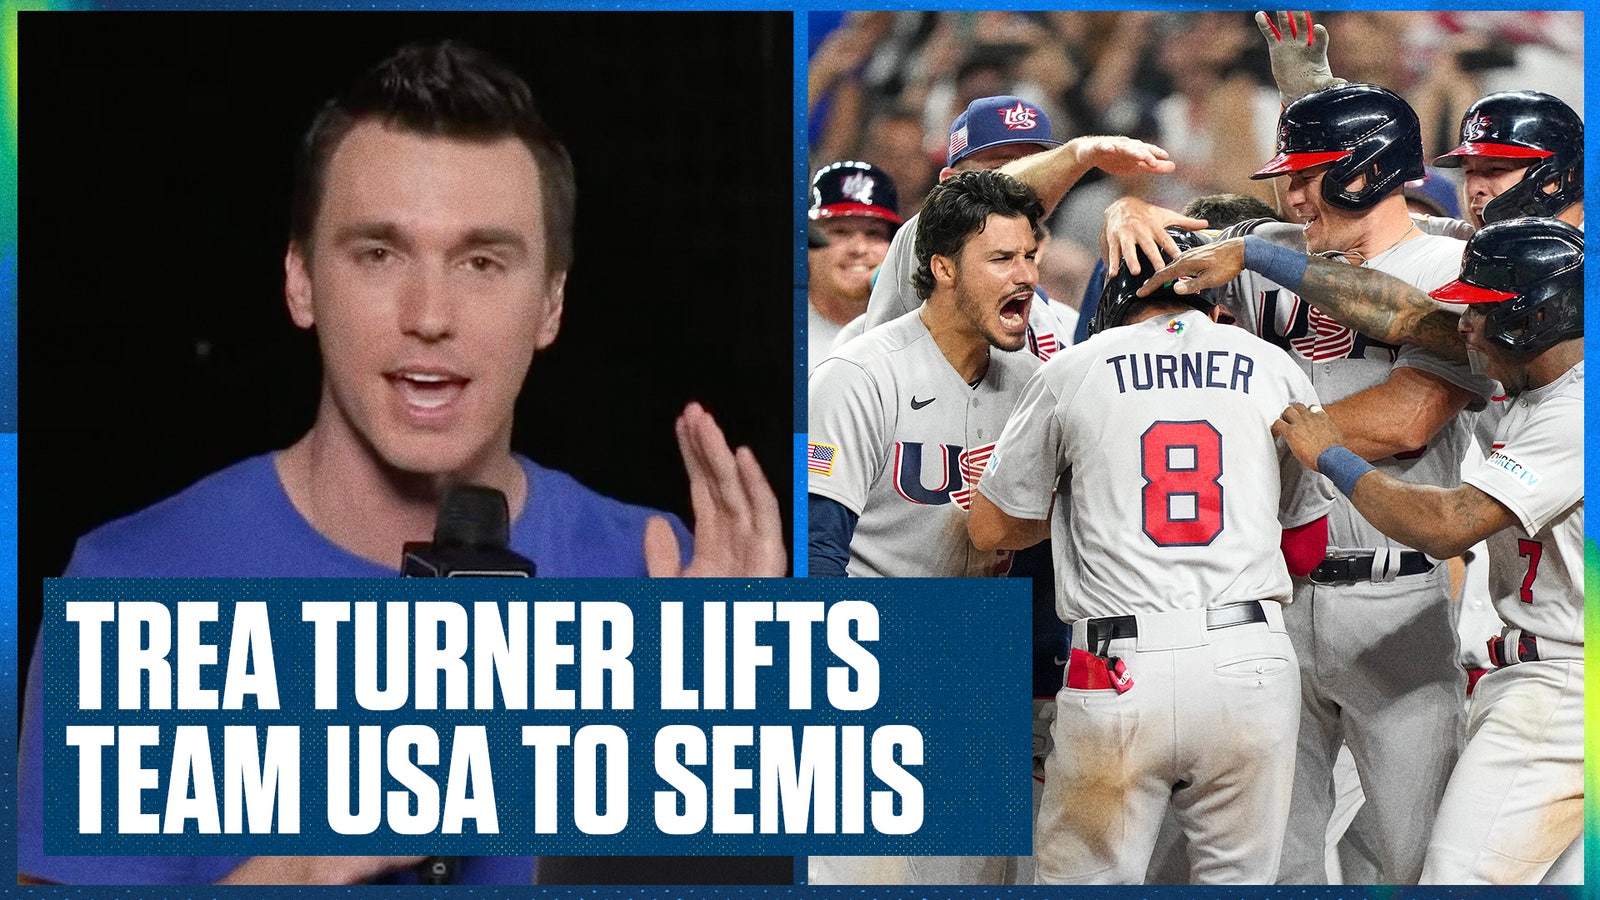 Team USA's epic comeback win to advance to the World Baseball Classic semifinals